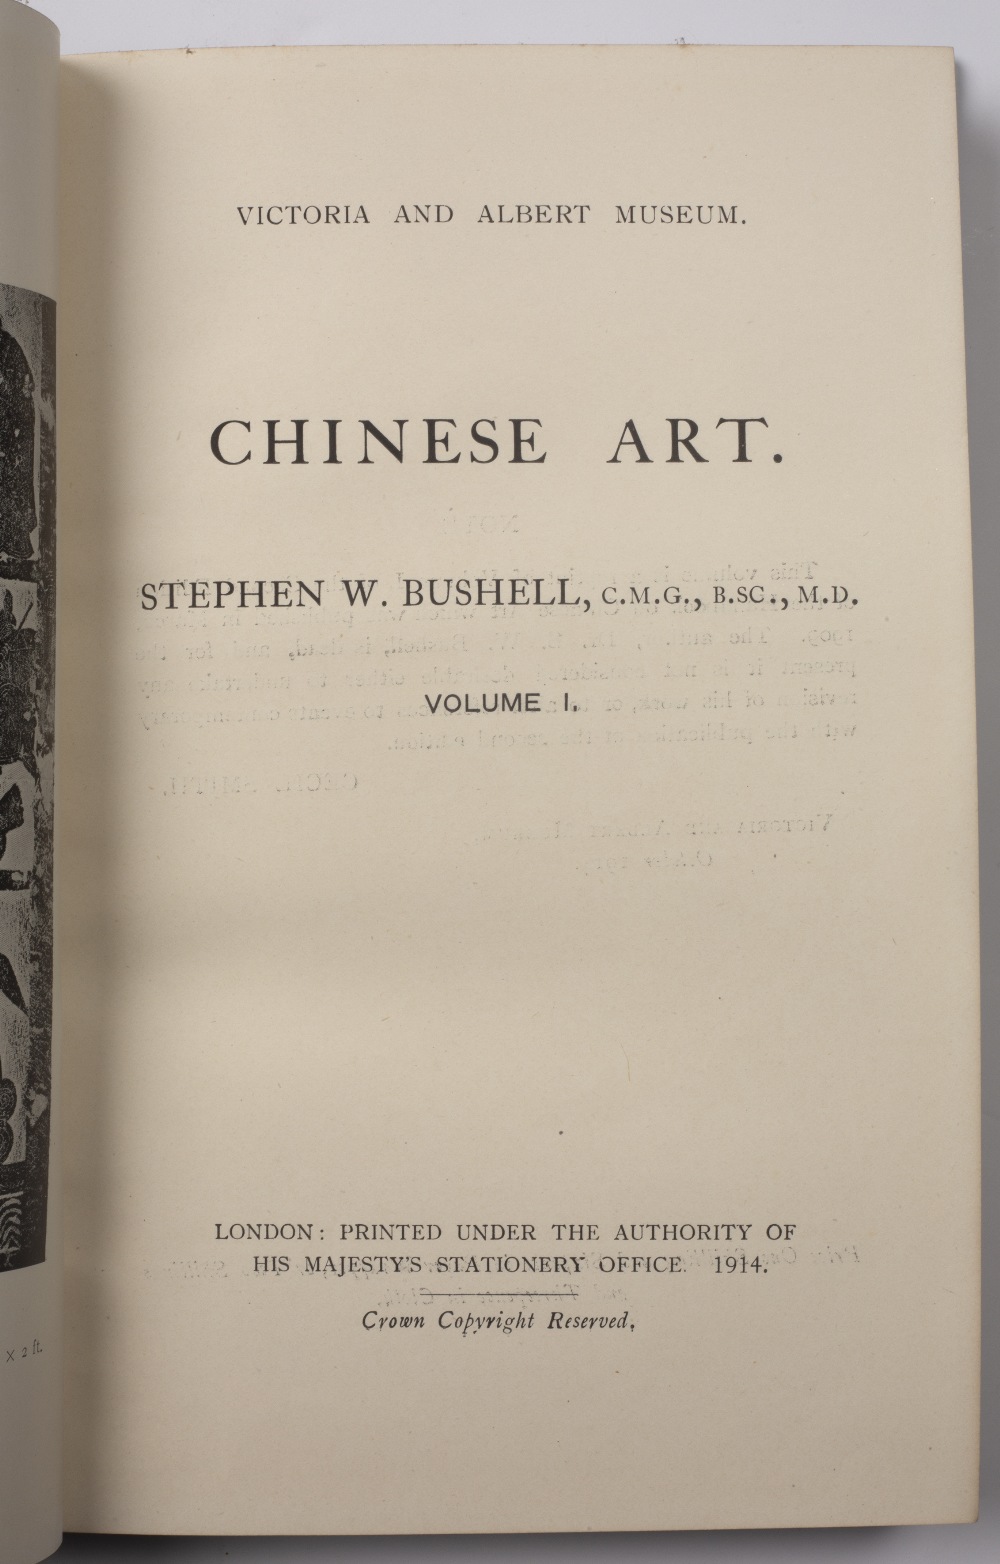 Chinese Art Two volumes by S. W. Bushell, 1914 (2) - Image 3 of 3